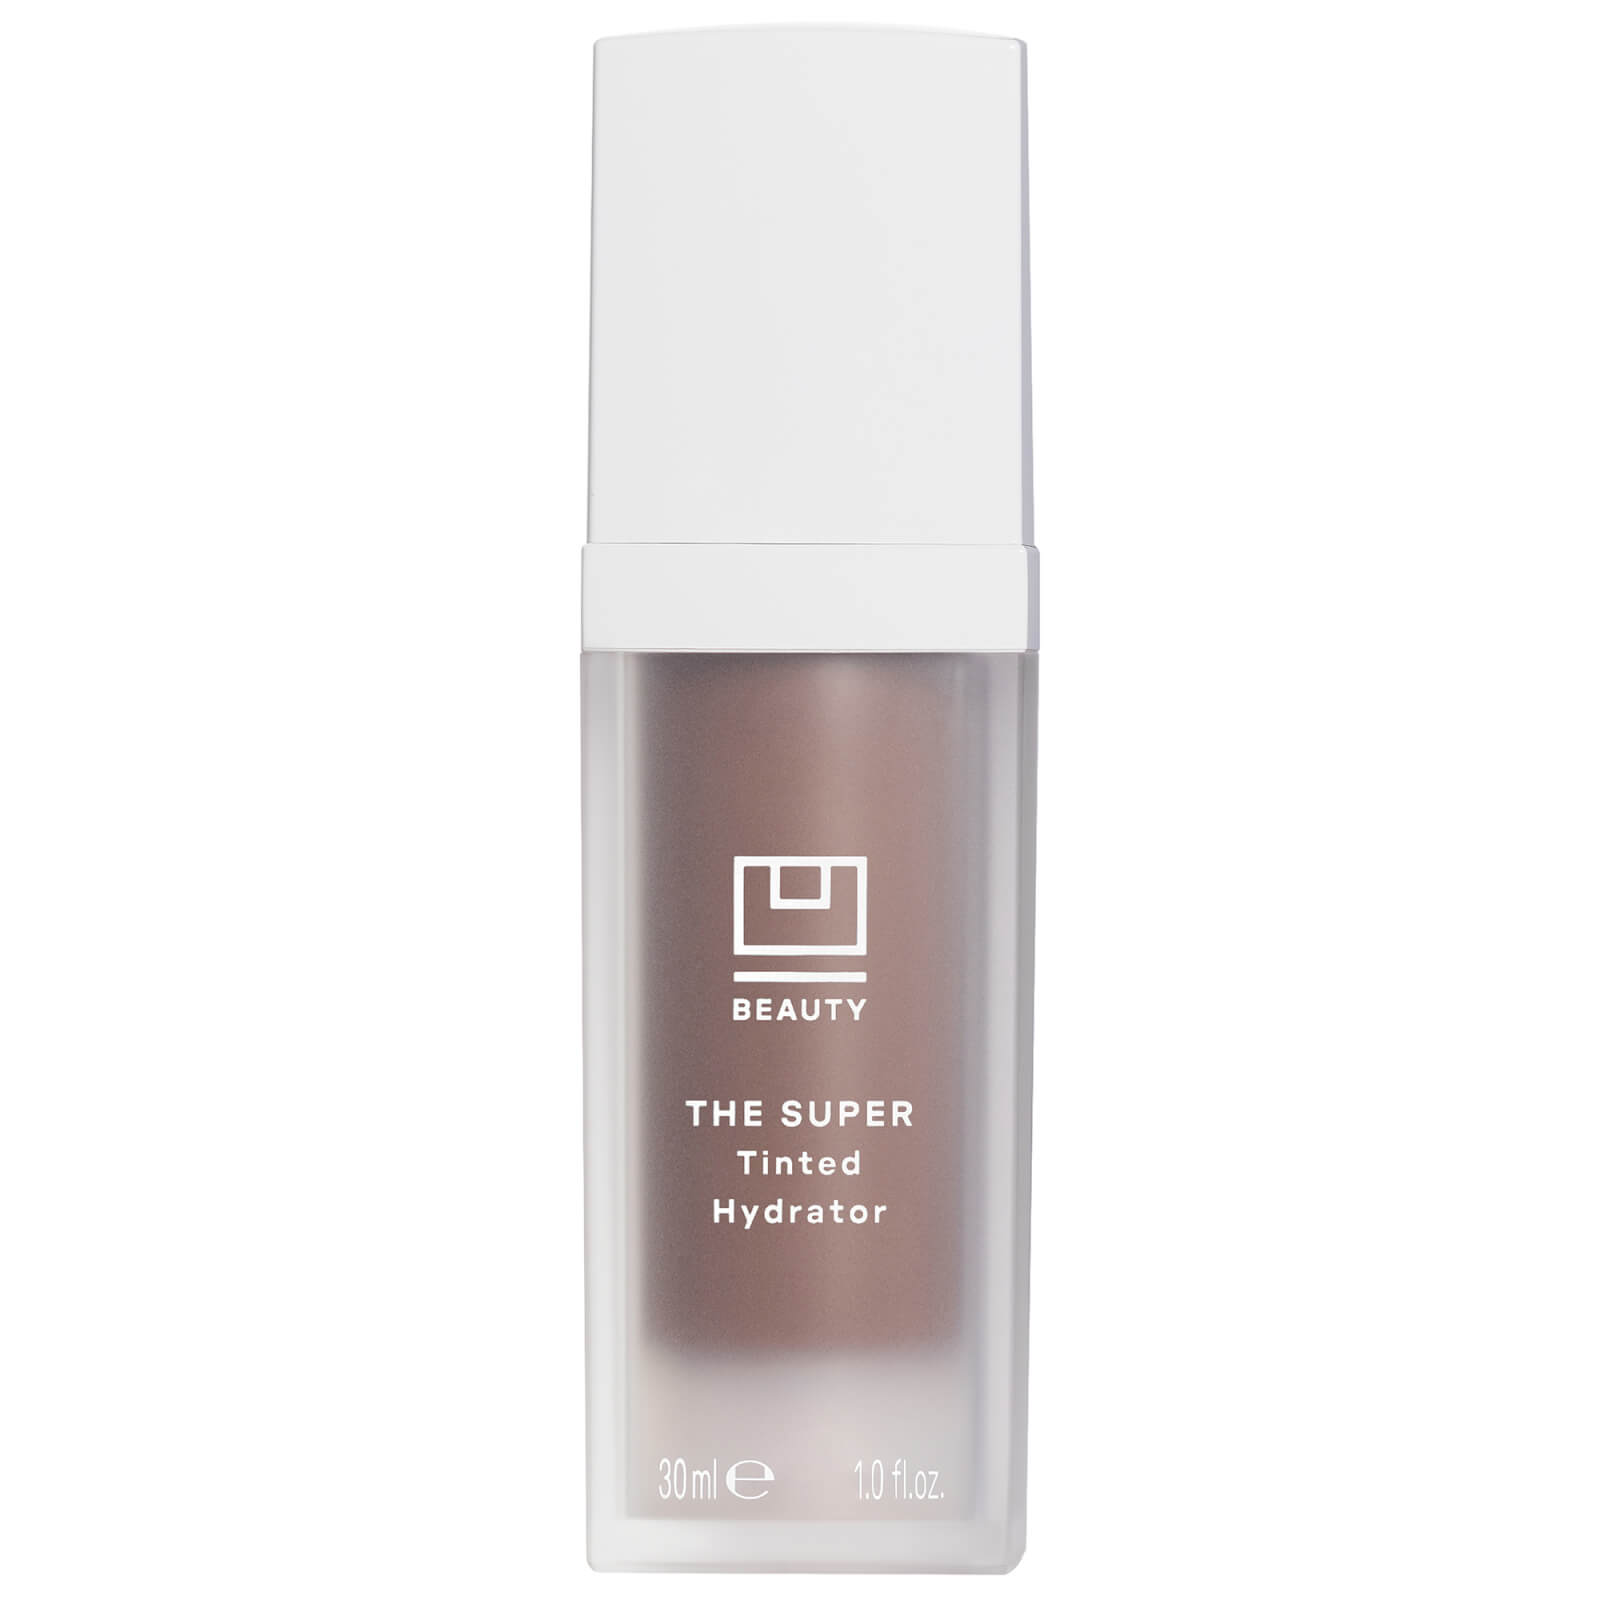 U Beauty The Super Tinted Hydrator 1 Fl. oz (various Shades) In White